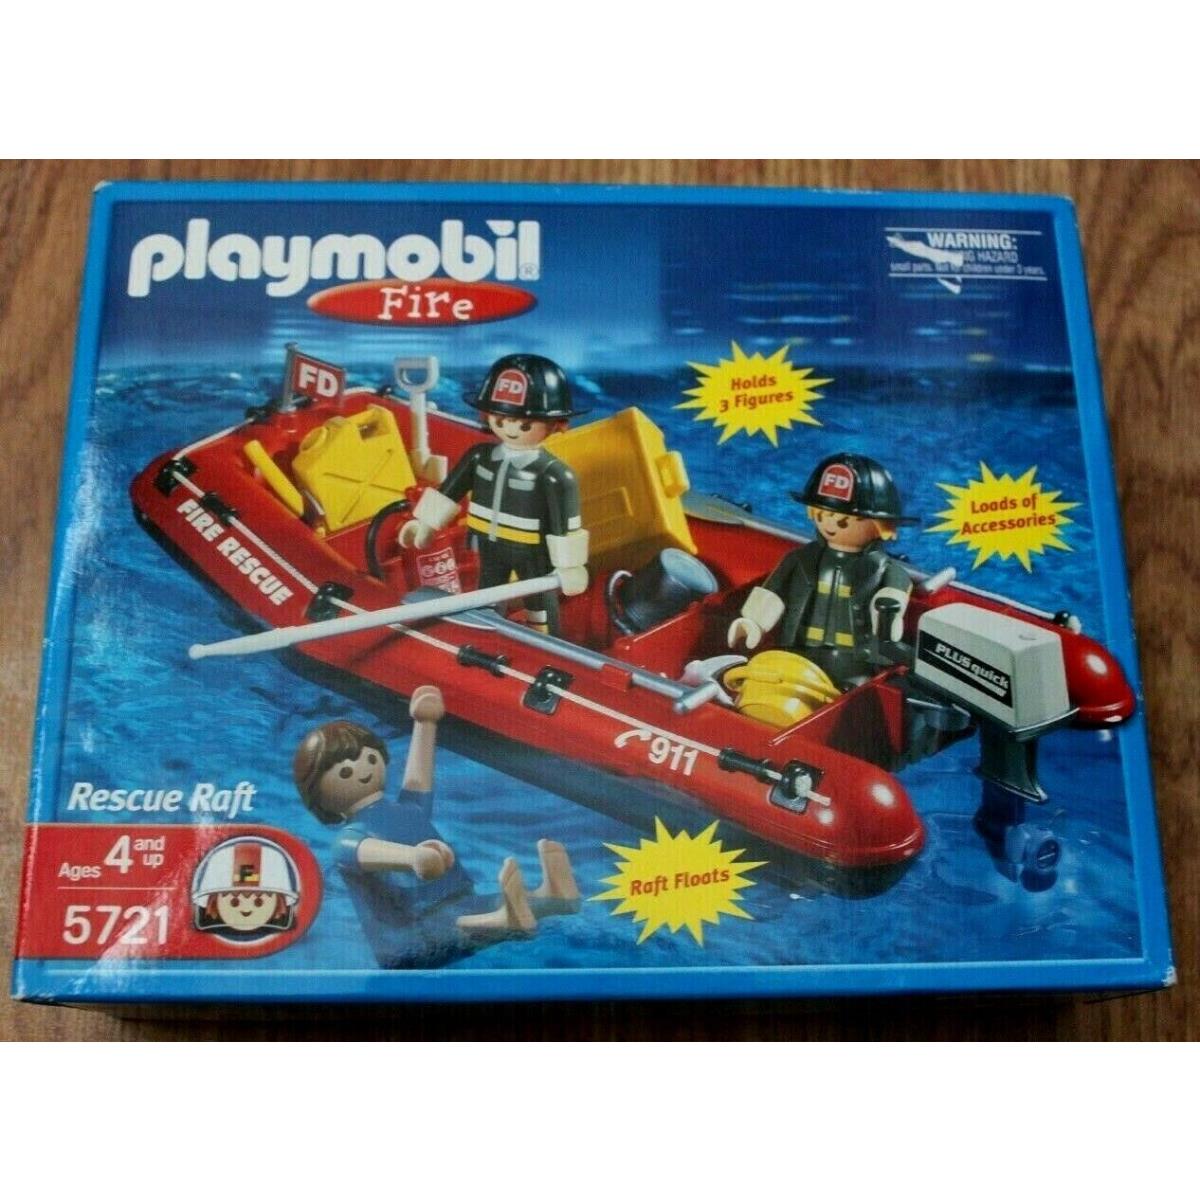 Playmobil 5721 Rescue Raft with Loads of Accessories